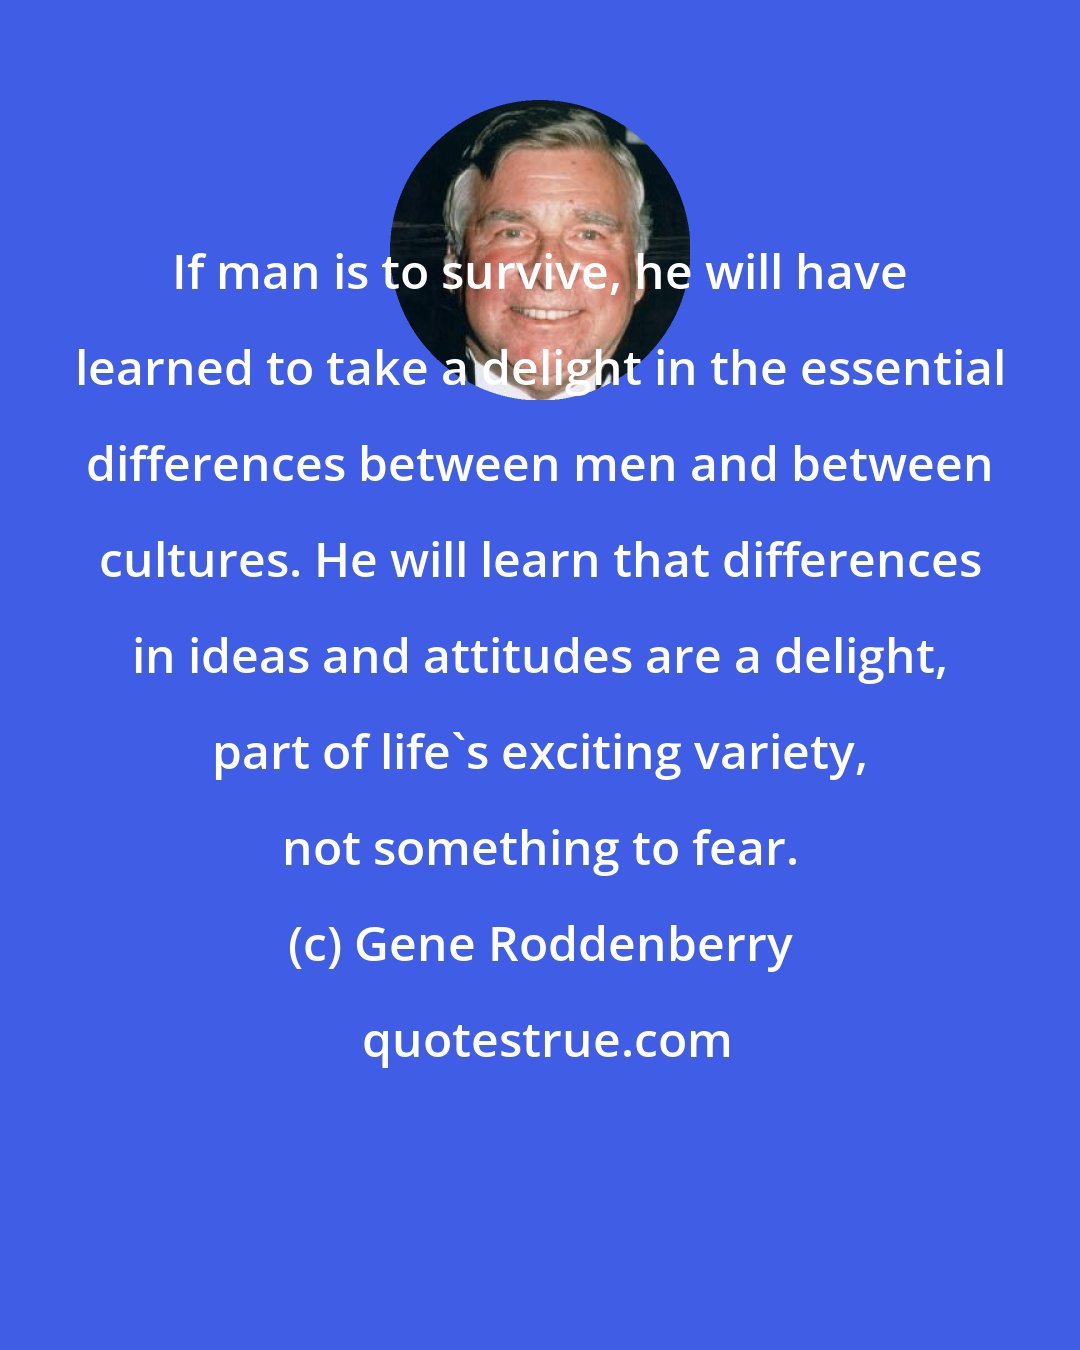 Gene Roddenberry: If man is to survive, he will have learned to take a delight in the essential differences between men and between cultures. He will learn that differences in ideas and attitudes are a delight, part of life's exciting variety, not something to fear.